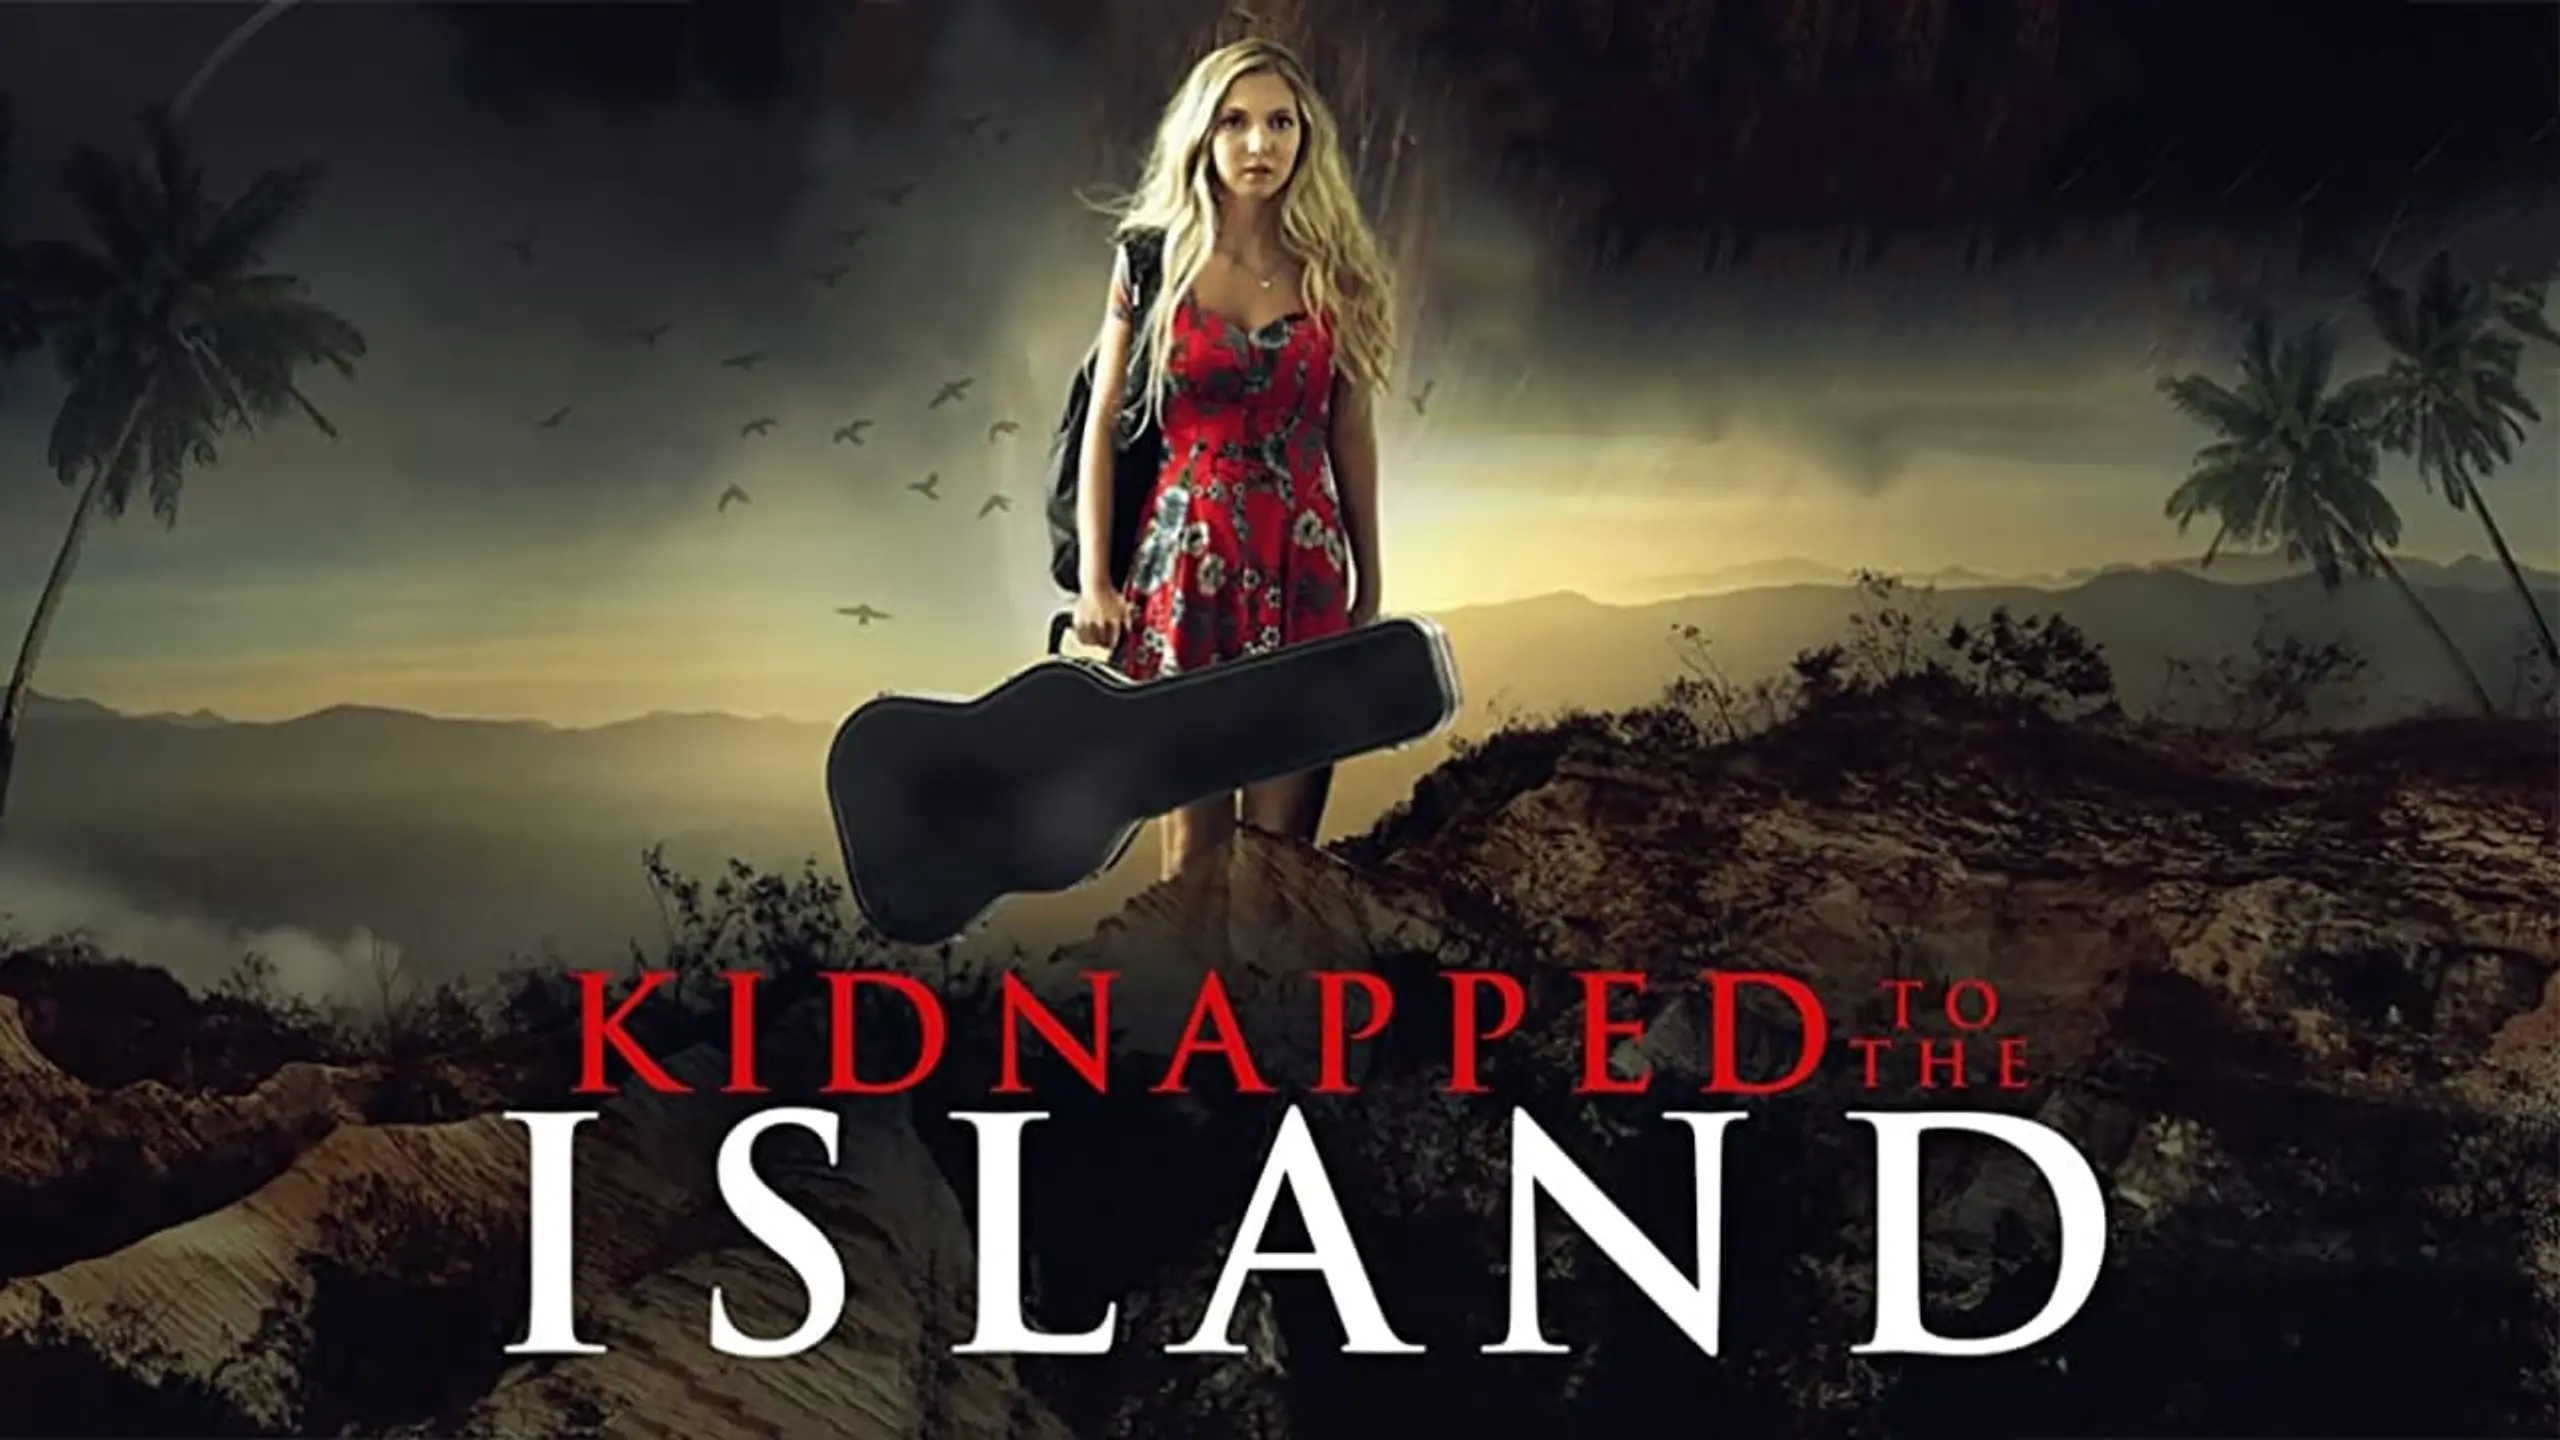 Kidnapped to the Island